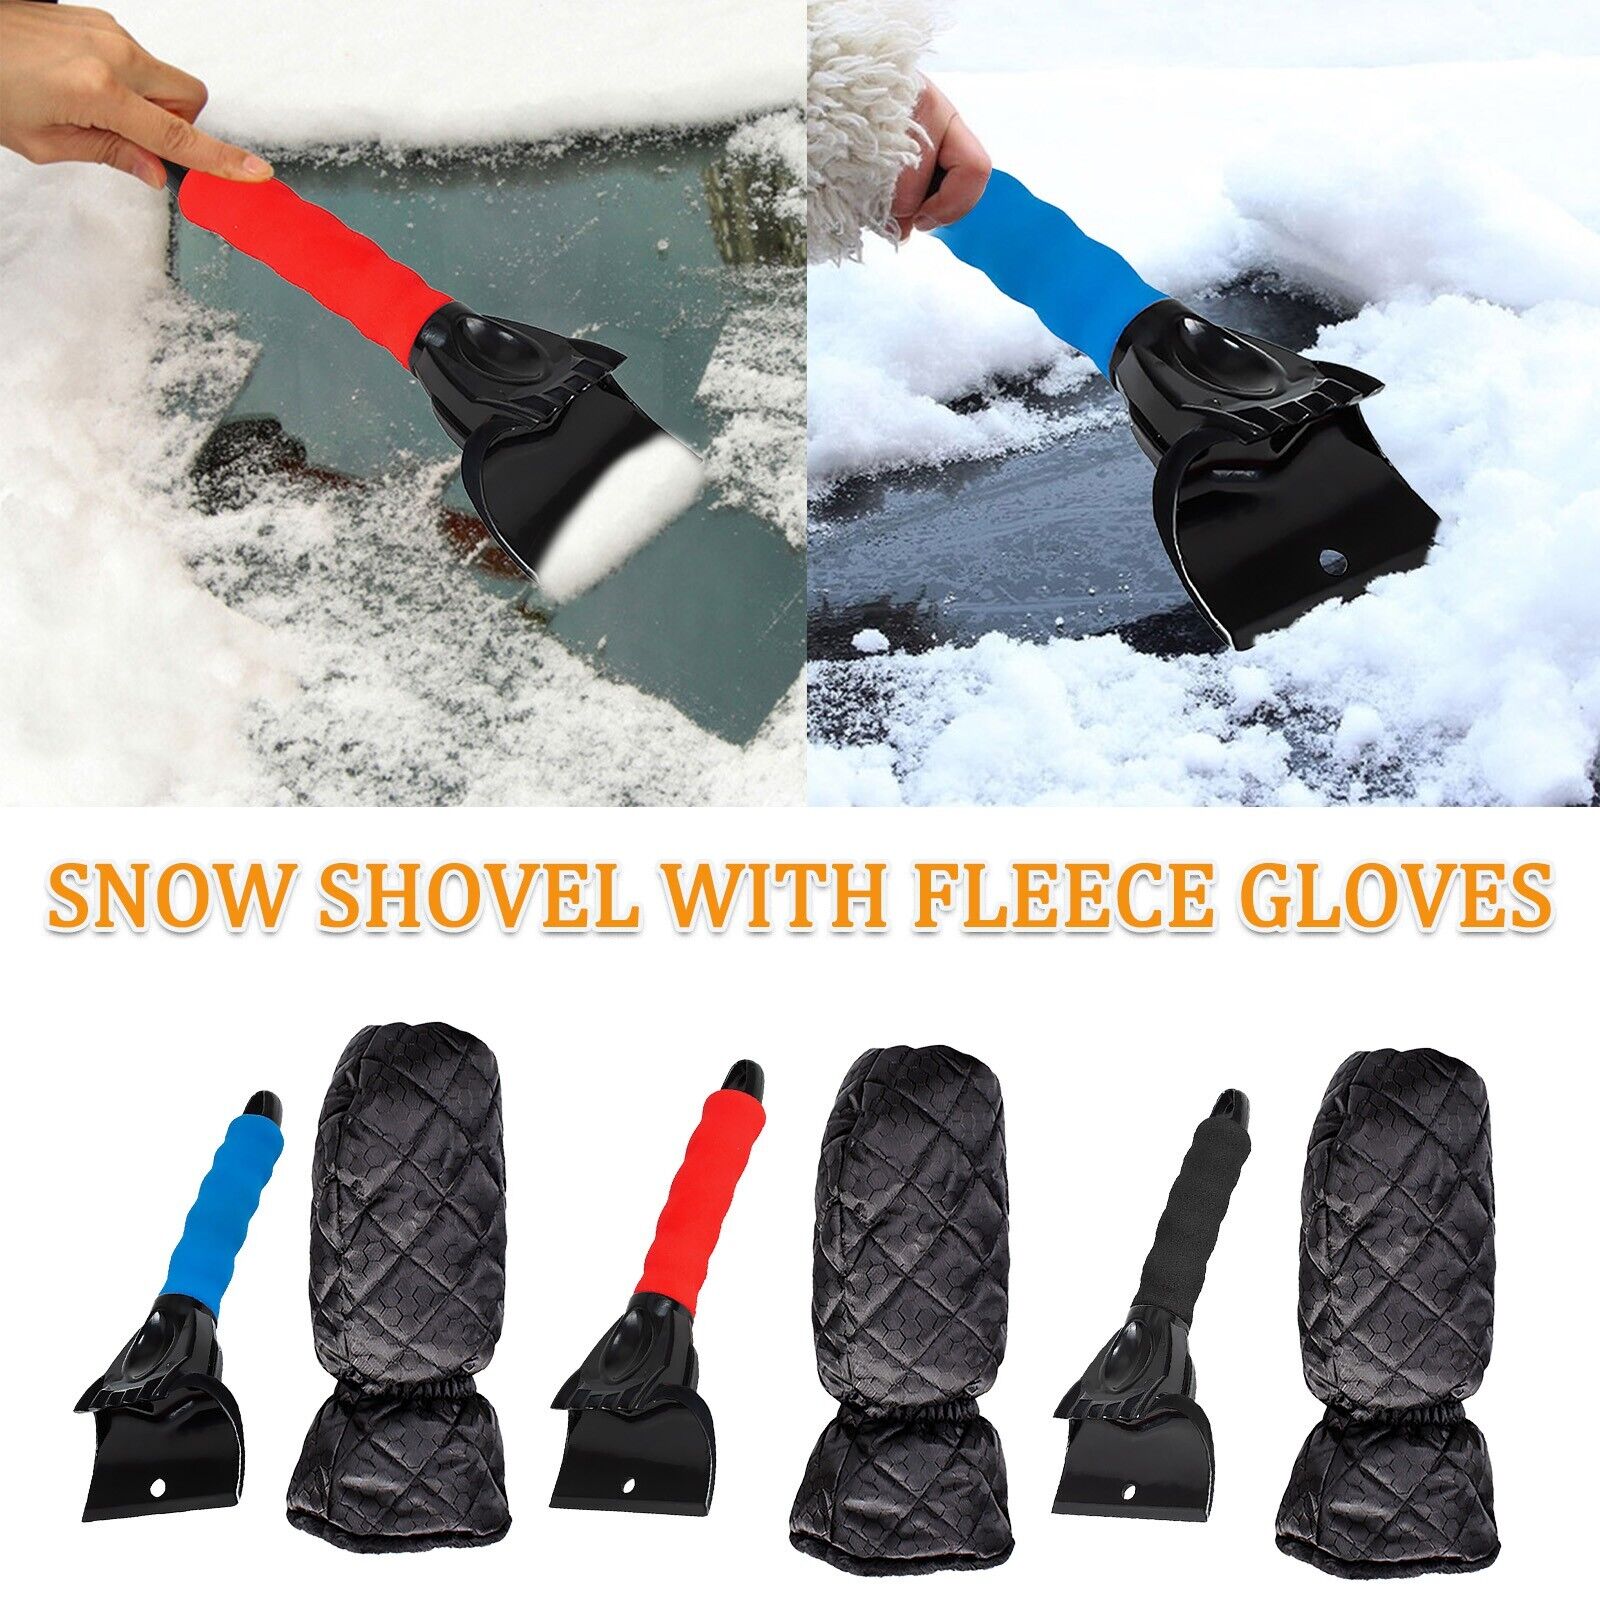 Fleece Gloves To Keep Warm Snow Removal Aluminum Dog Boxes For Pickup Trucks